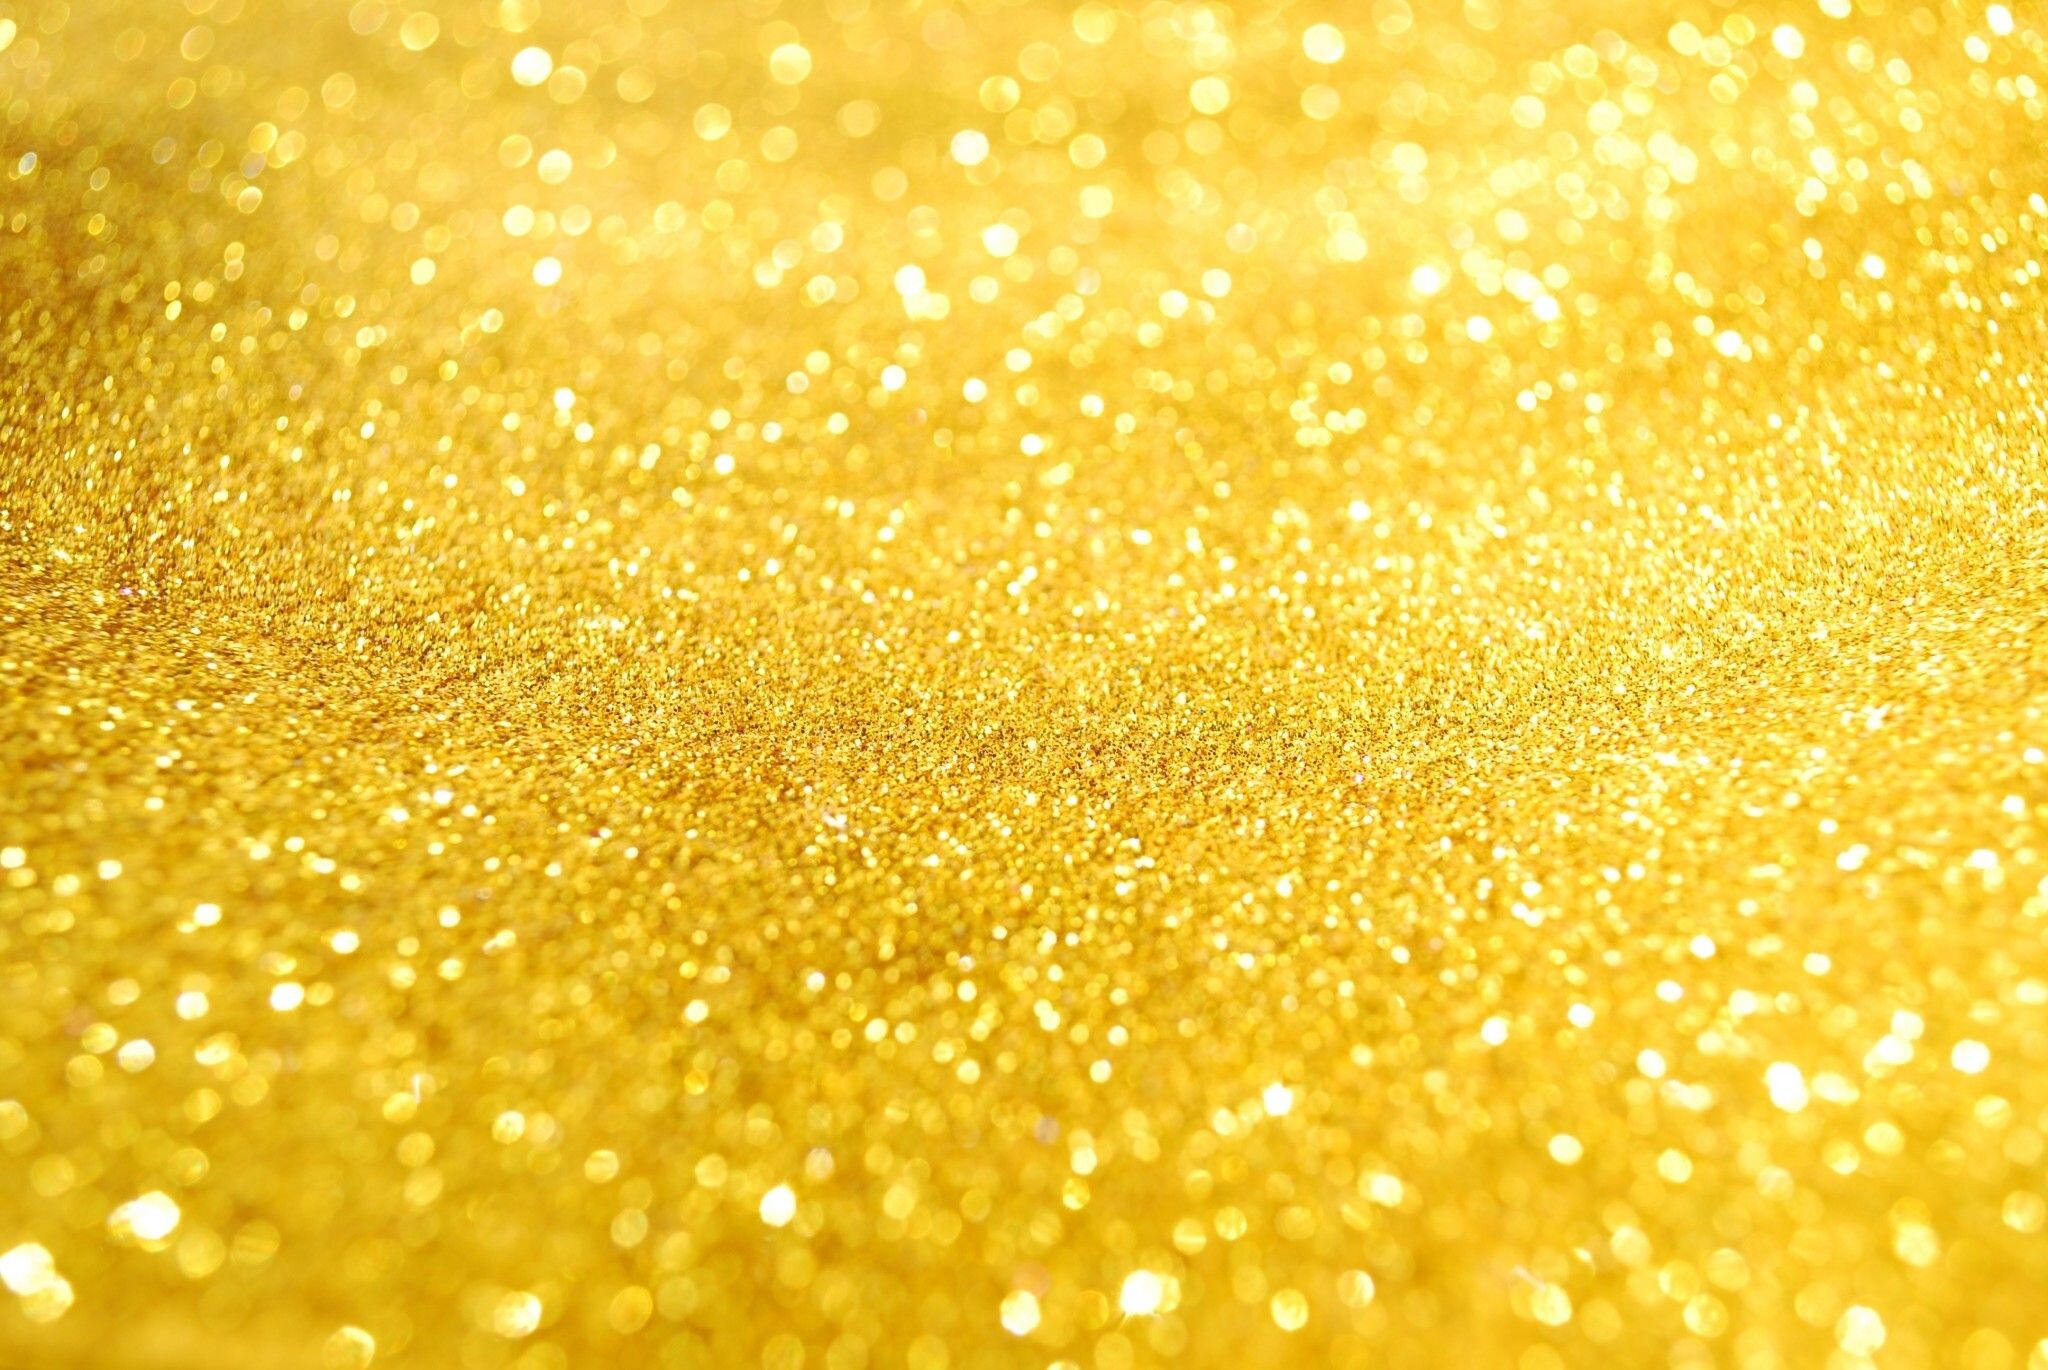 Gold Sparkle: Shiny or sparkly yellow glitter, Small, brightly colored particles, Glitter coatings. 2050x1370 HD Wallpaper.